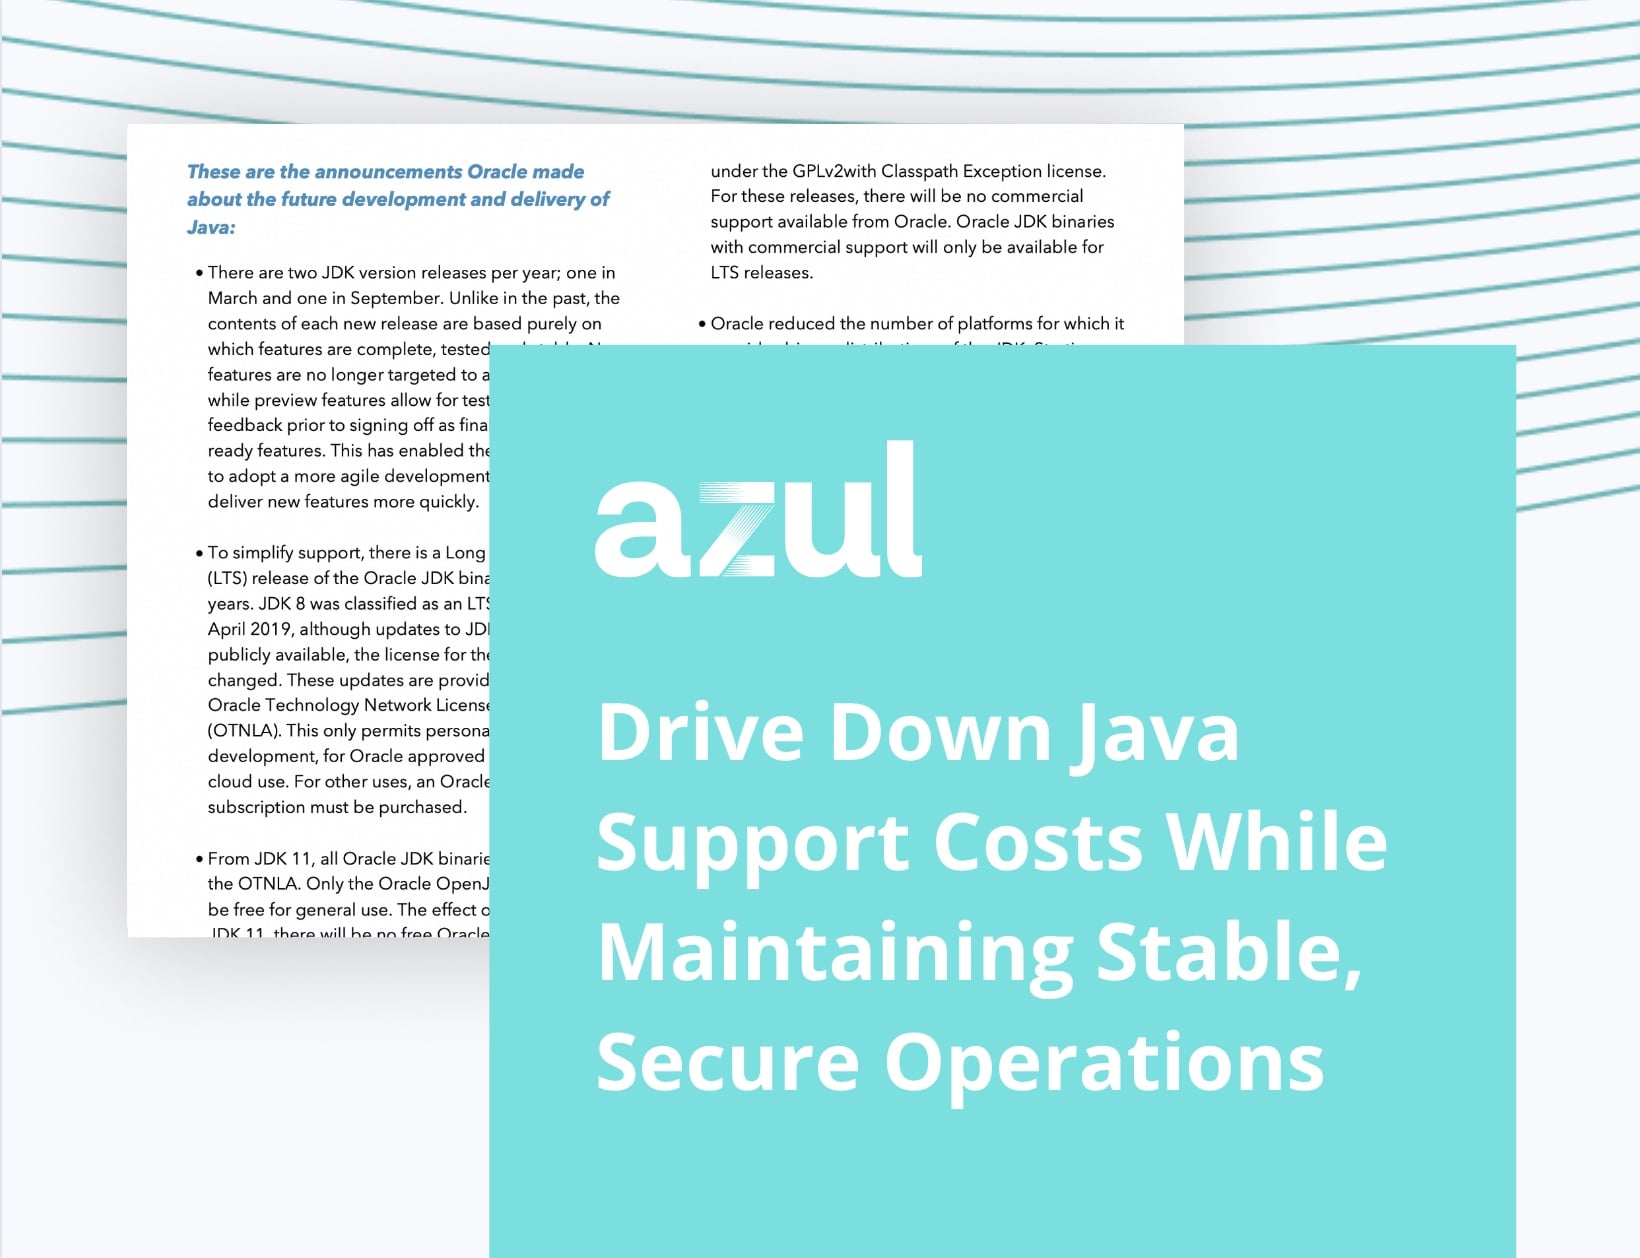 Drive Down Java Support Costs While Maintaining Stable Secure Operations